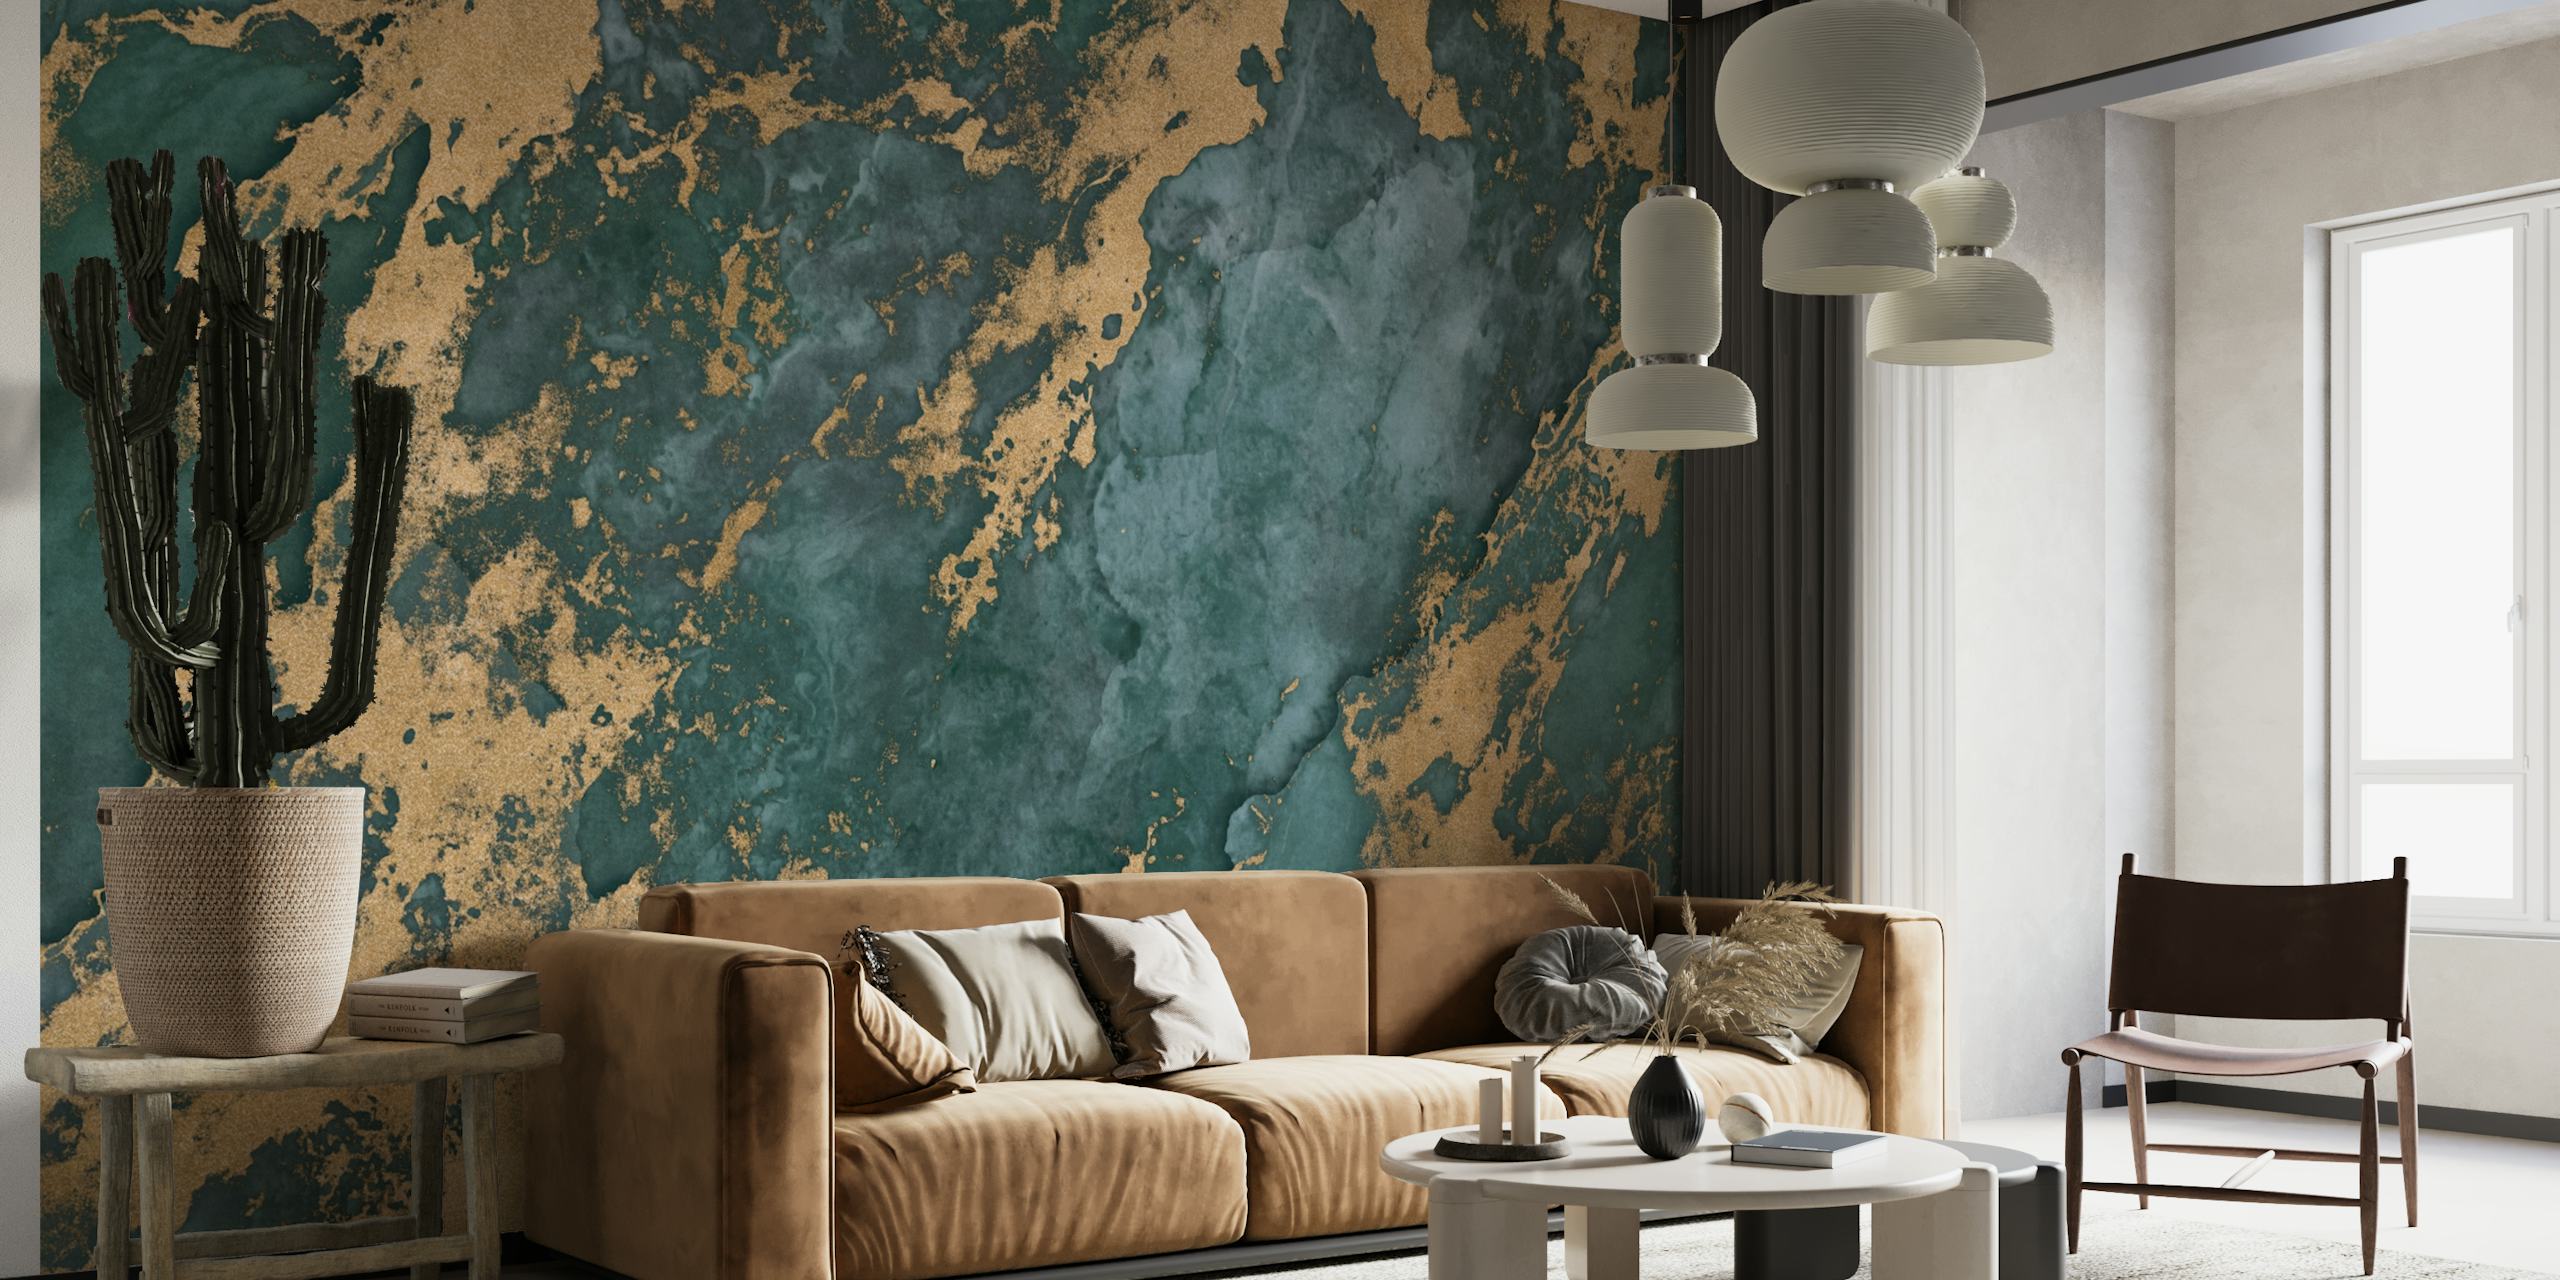 Mineral Marble Texture Teal Gold papel pintado